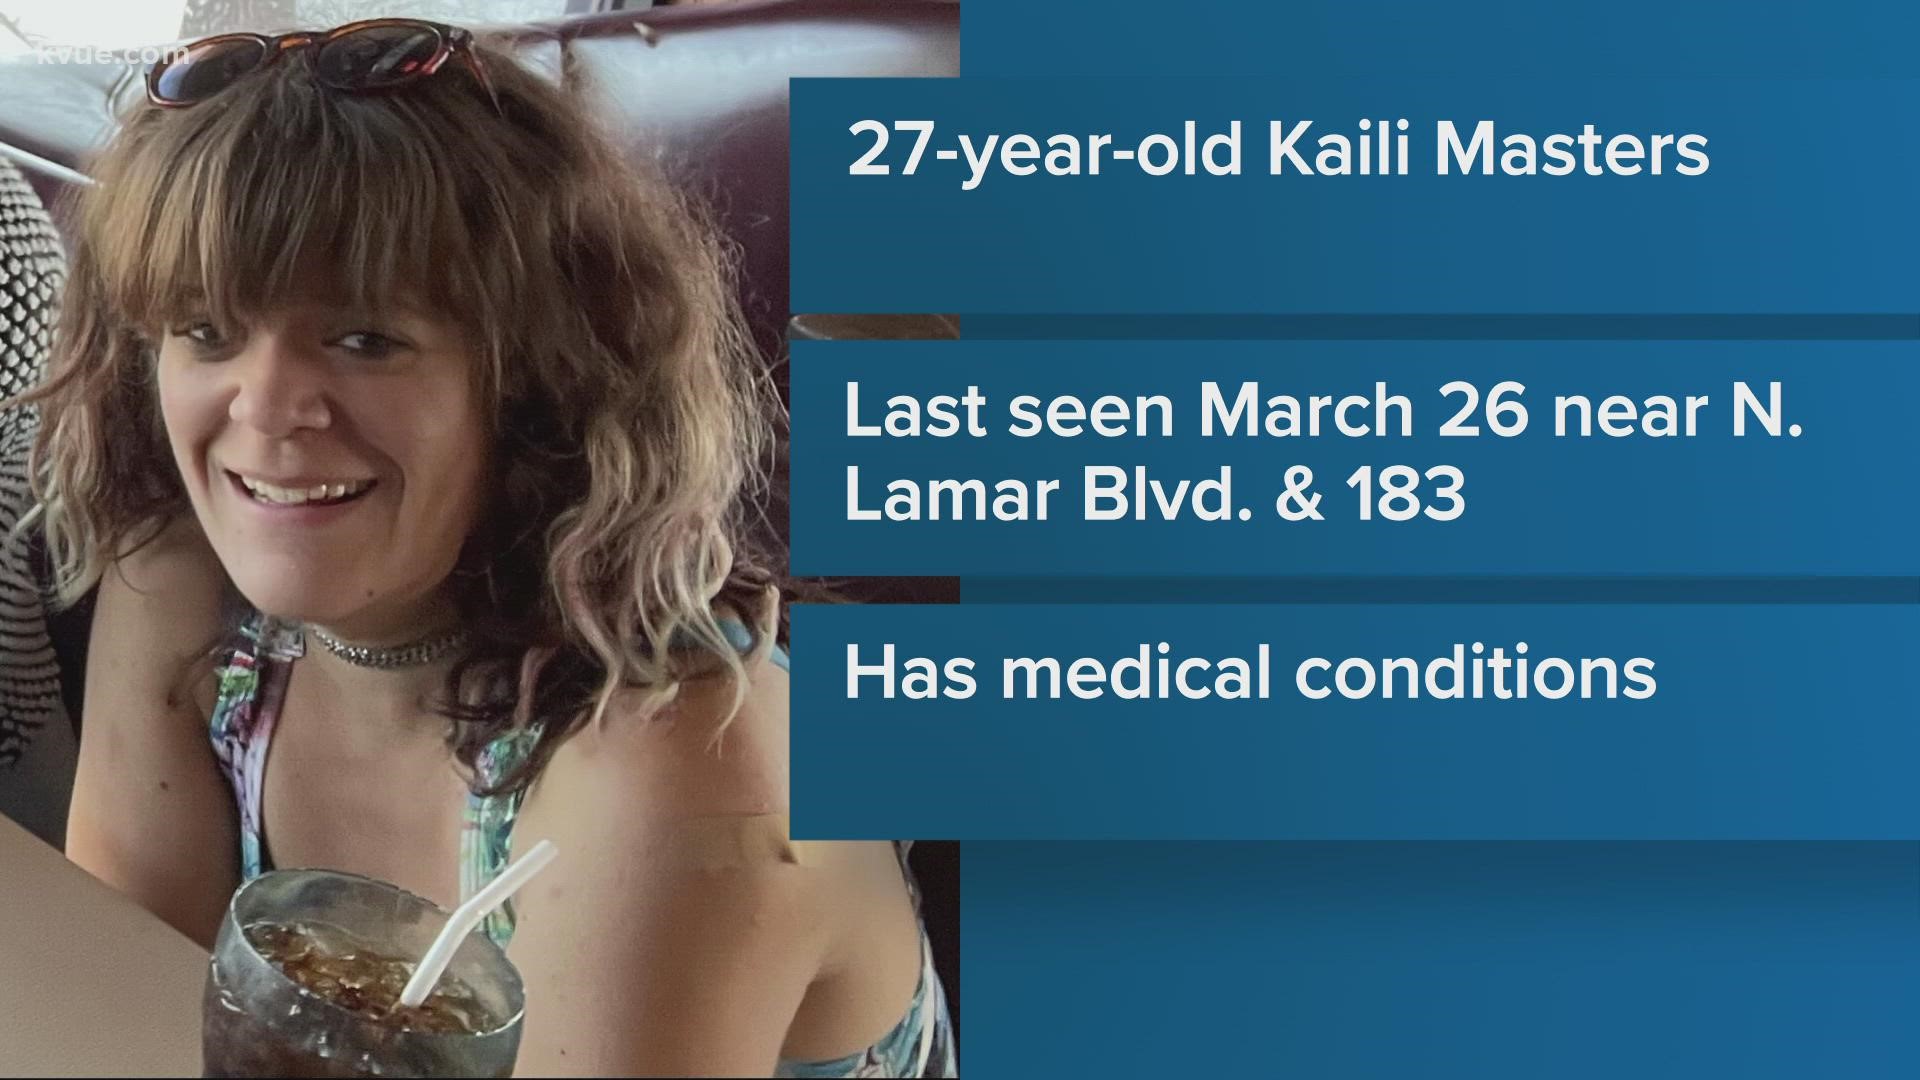 Police say Kaili Masters has medical conditions that cause concern for her well-being.